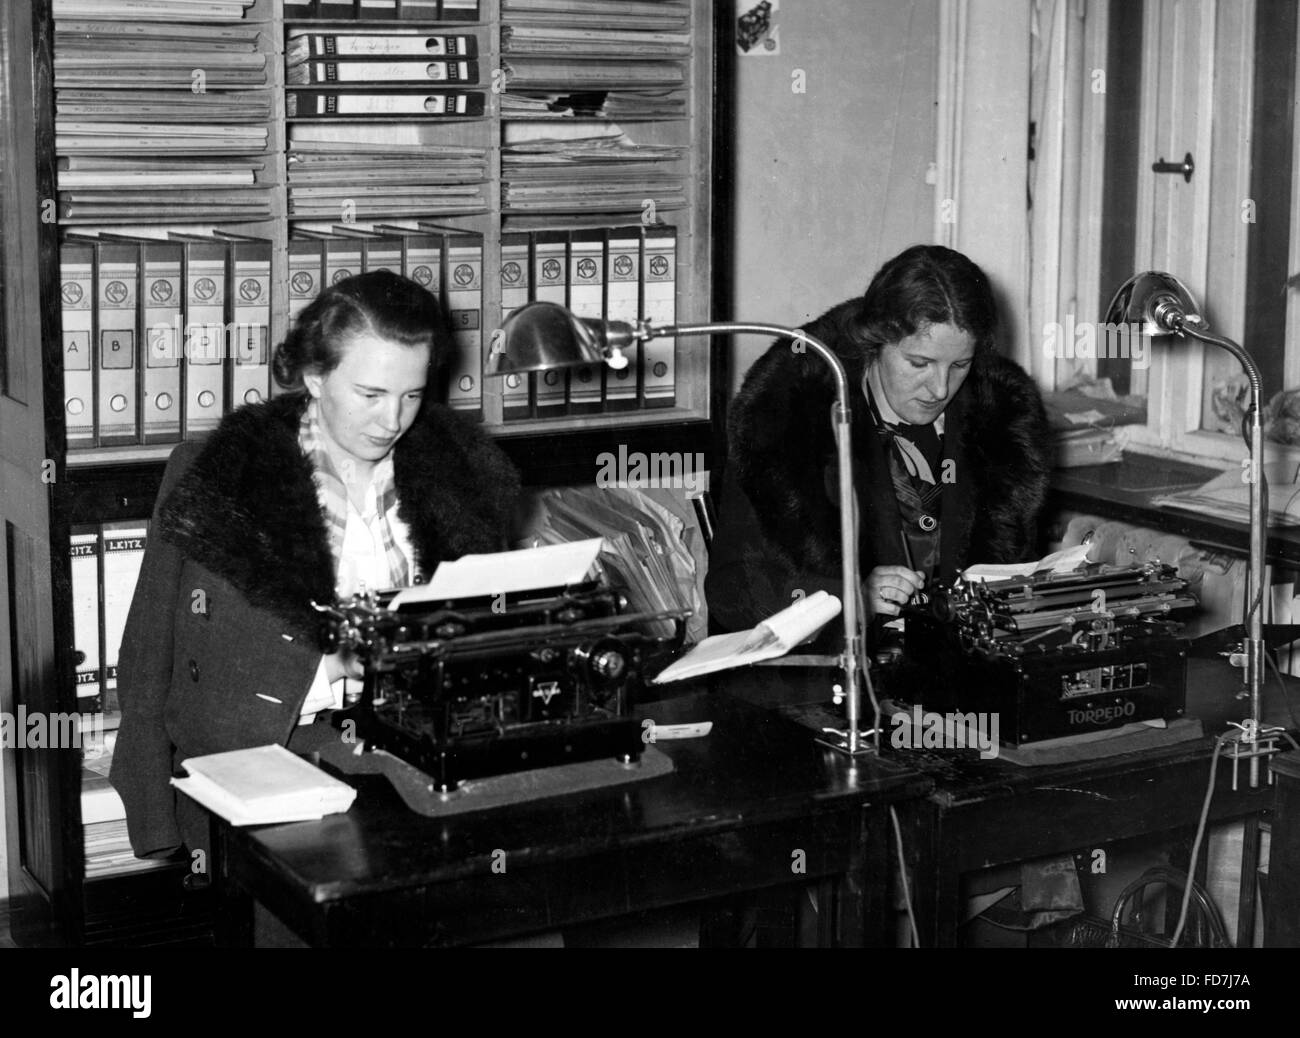 1940 office Black and White Stock Photos & Images - Alamy